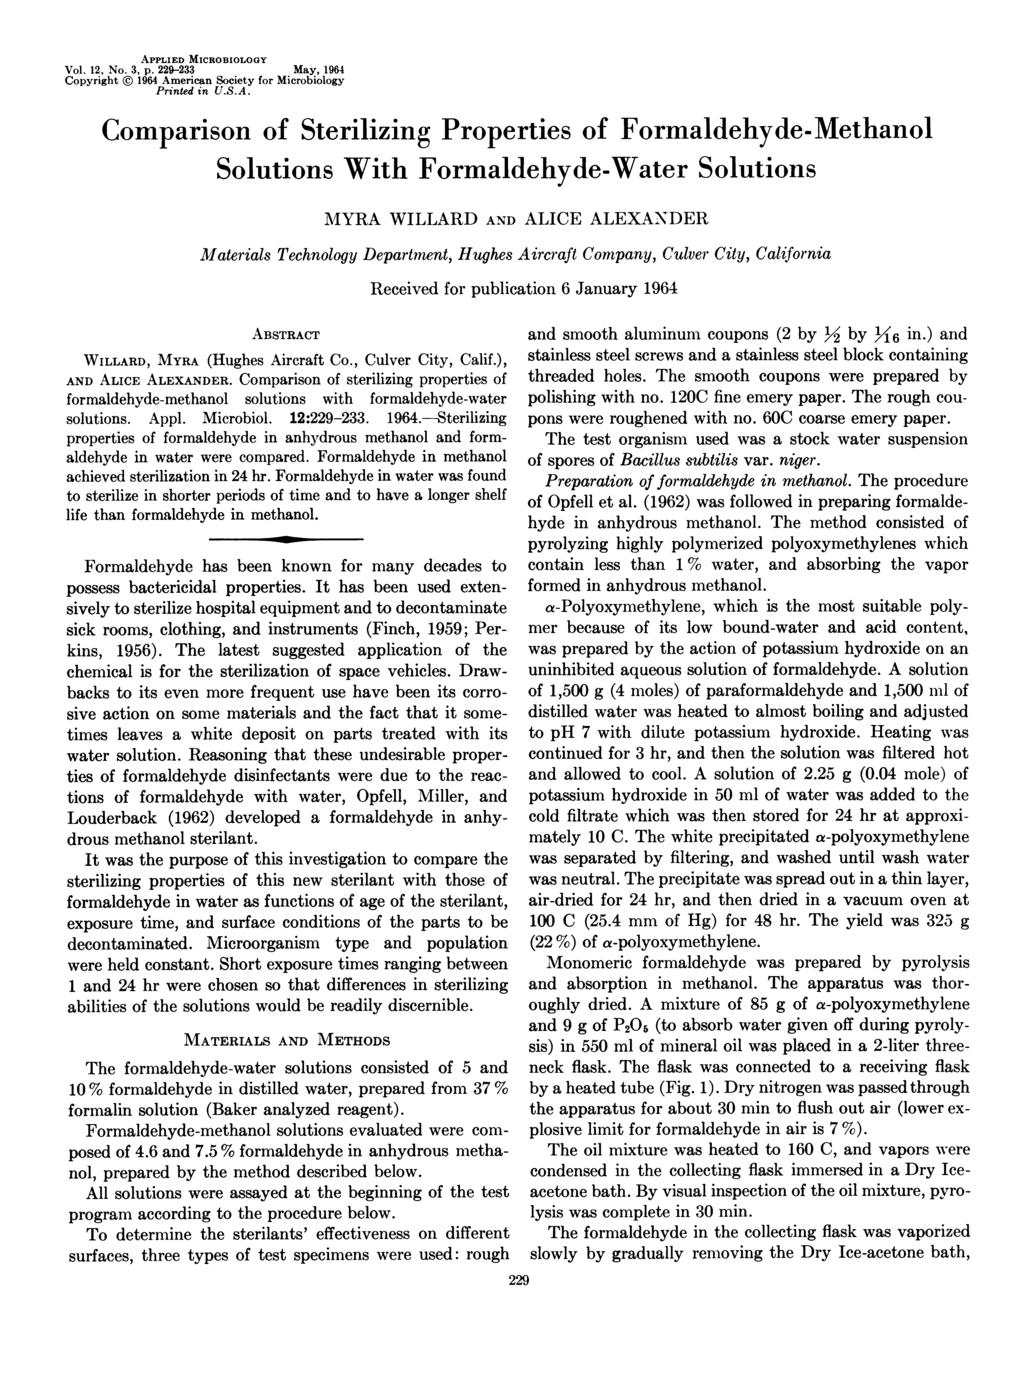 APPLIED MICROBIOLOGY Vol., No., p. 9- May, 96 Copyright 96 American Society for Microbiology Printed in U.S.A. Comparison of Sterilizing Properties of Formaldehyde-Methanol Solutions With